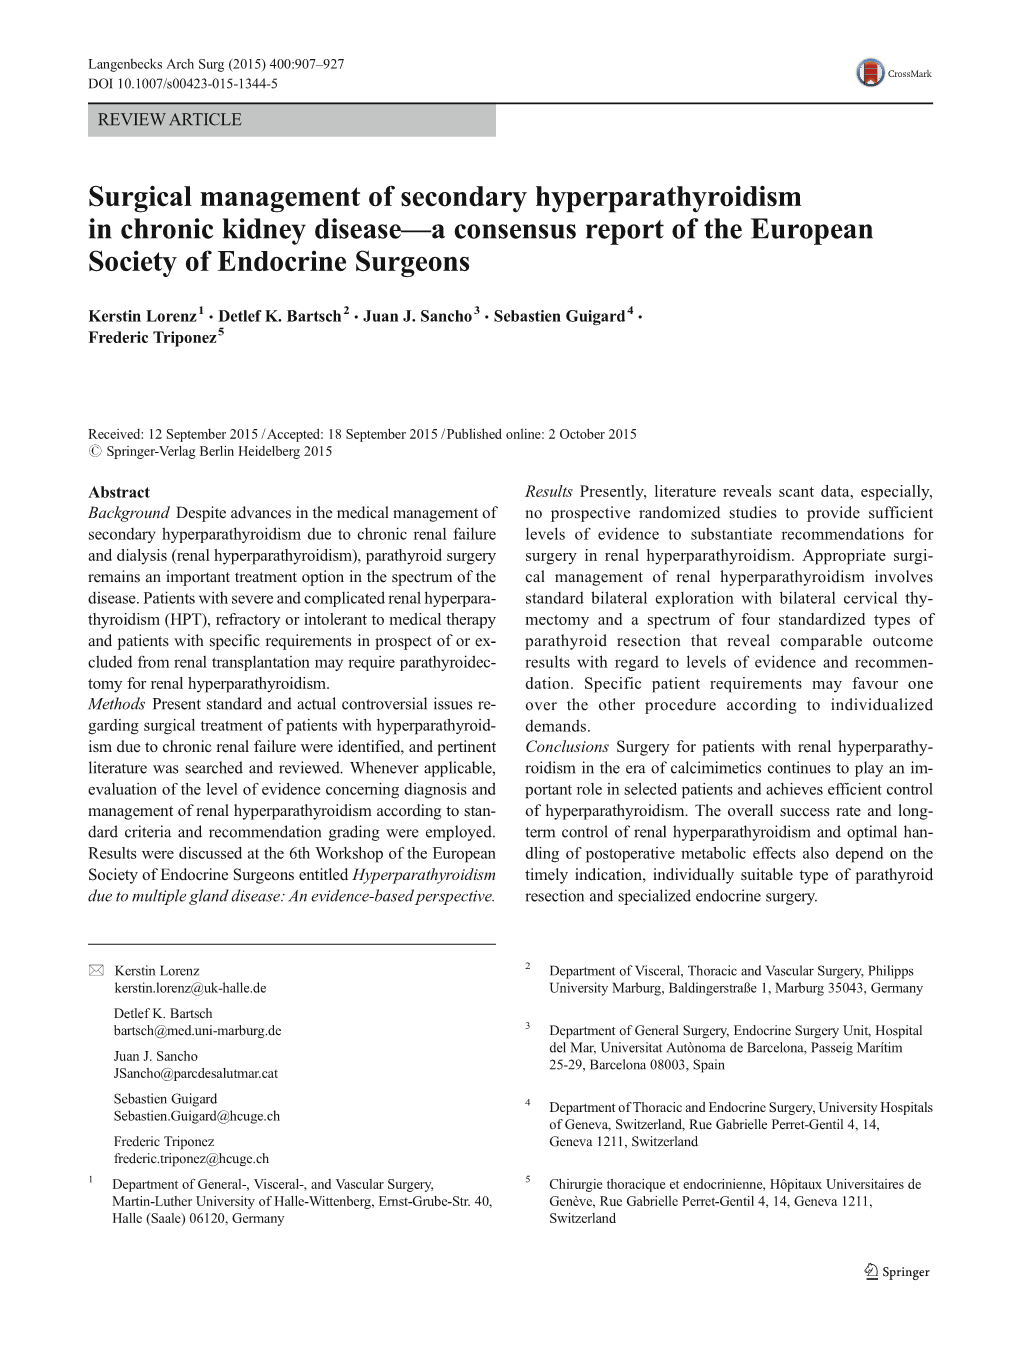 Surgical Management of Secondary Hyperparathyroidism in Chronic Kidney Disease—A Consensus Report of the European Society of Endocrine Surgeons